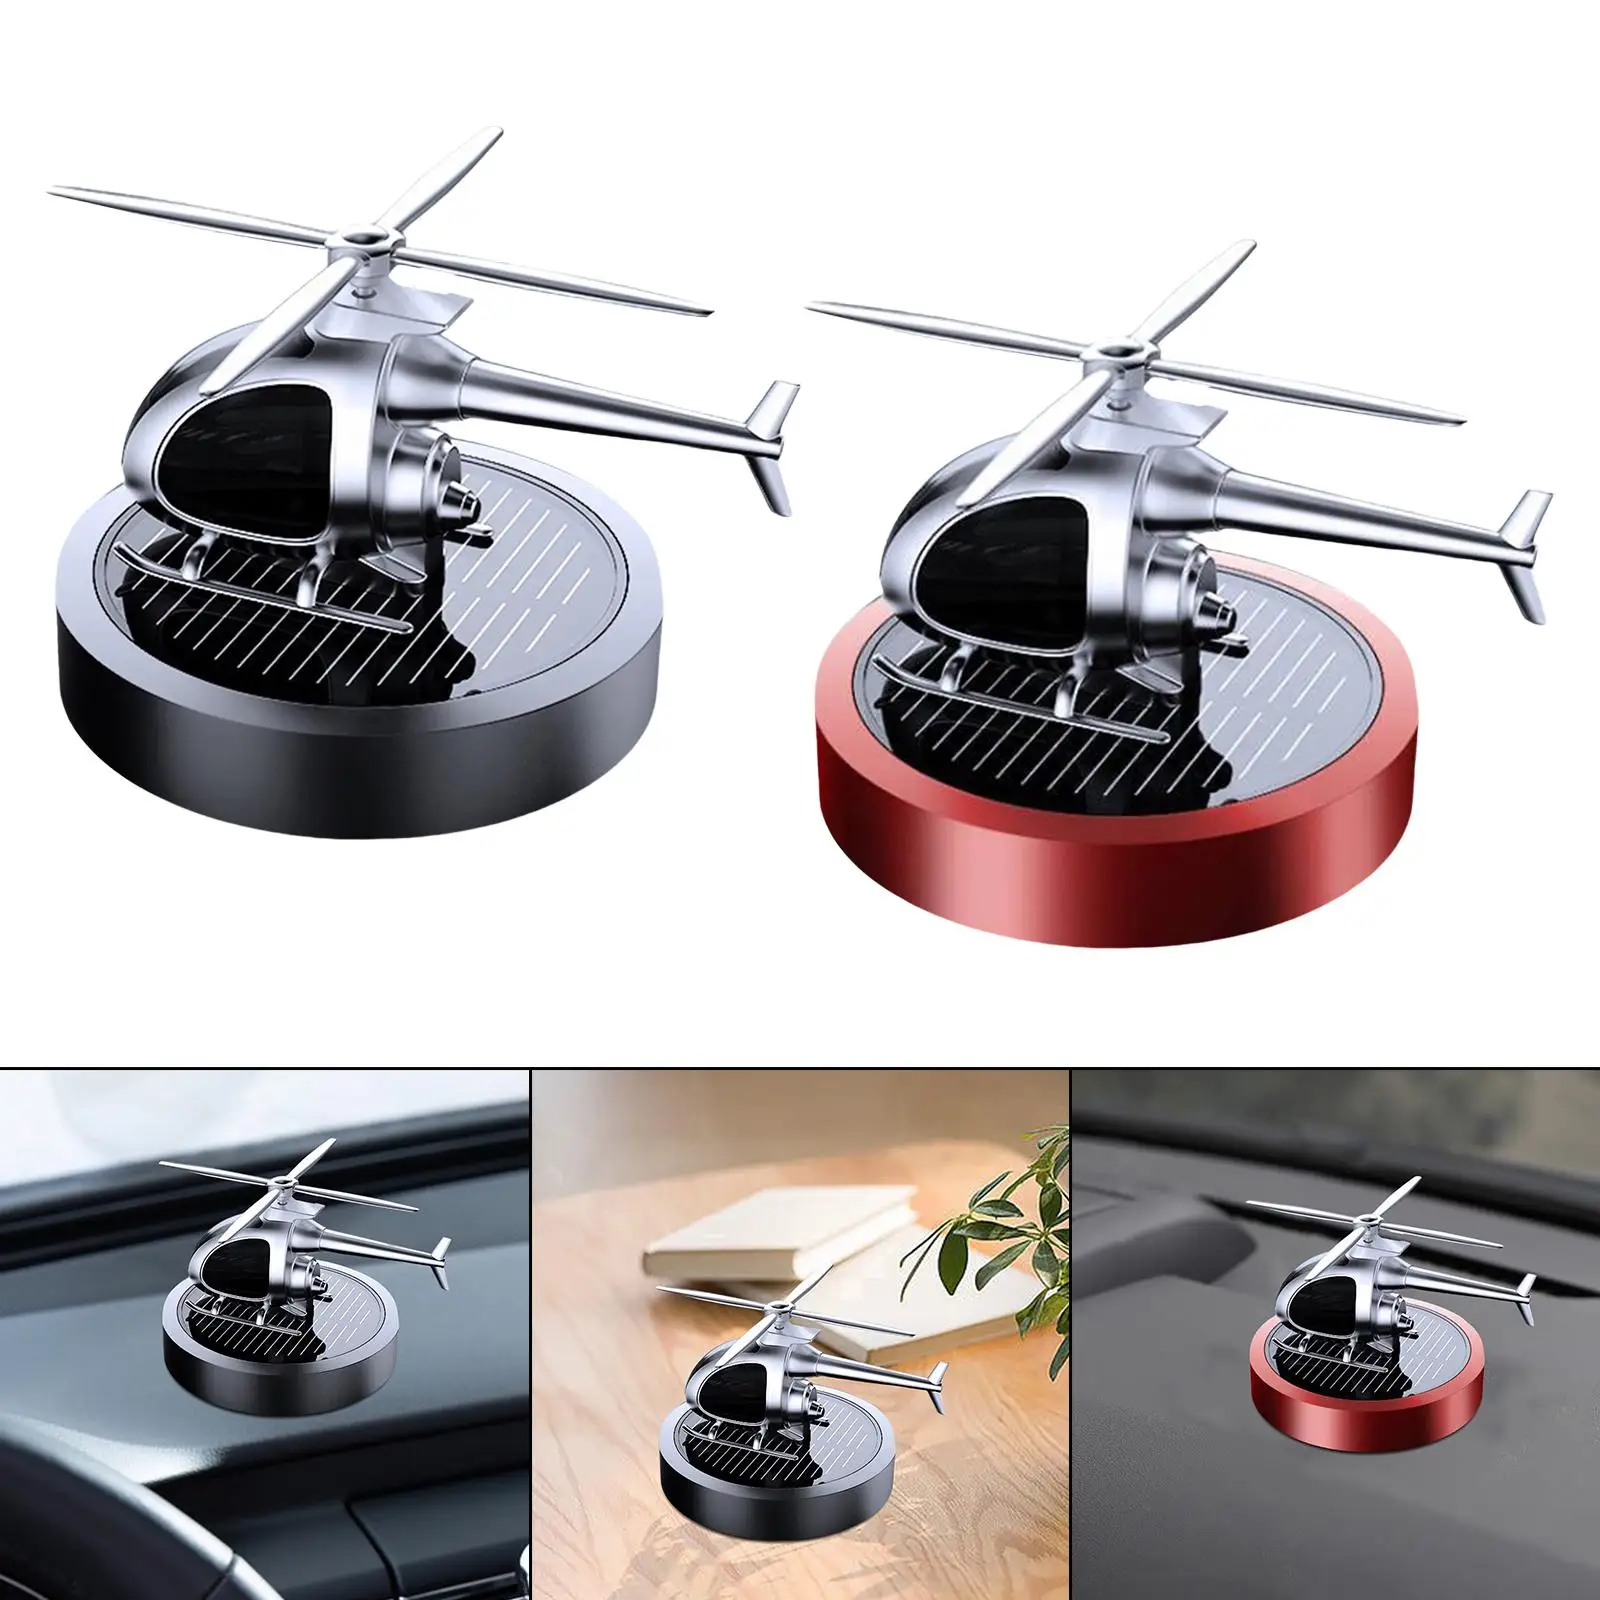 Solar Car Air Freshener Essential Oil Diffuser Helicopter Model Stylish Creative Small for Car Vehicles Office Desk Decoration